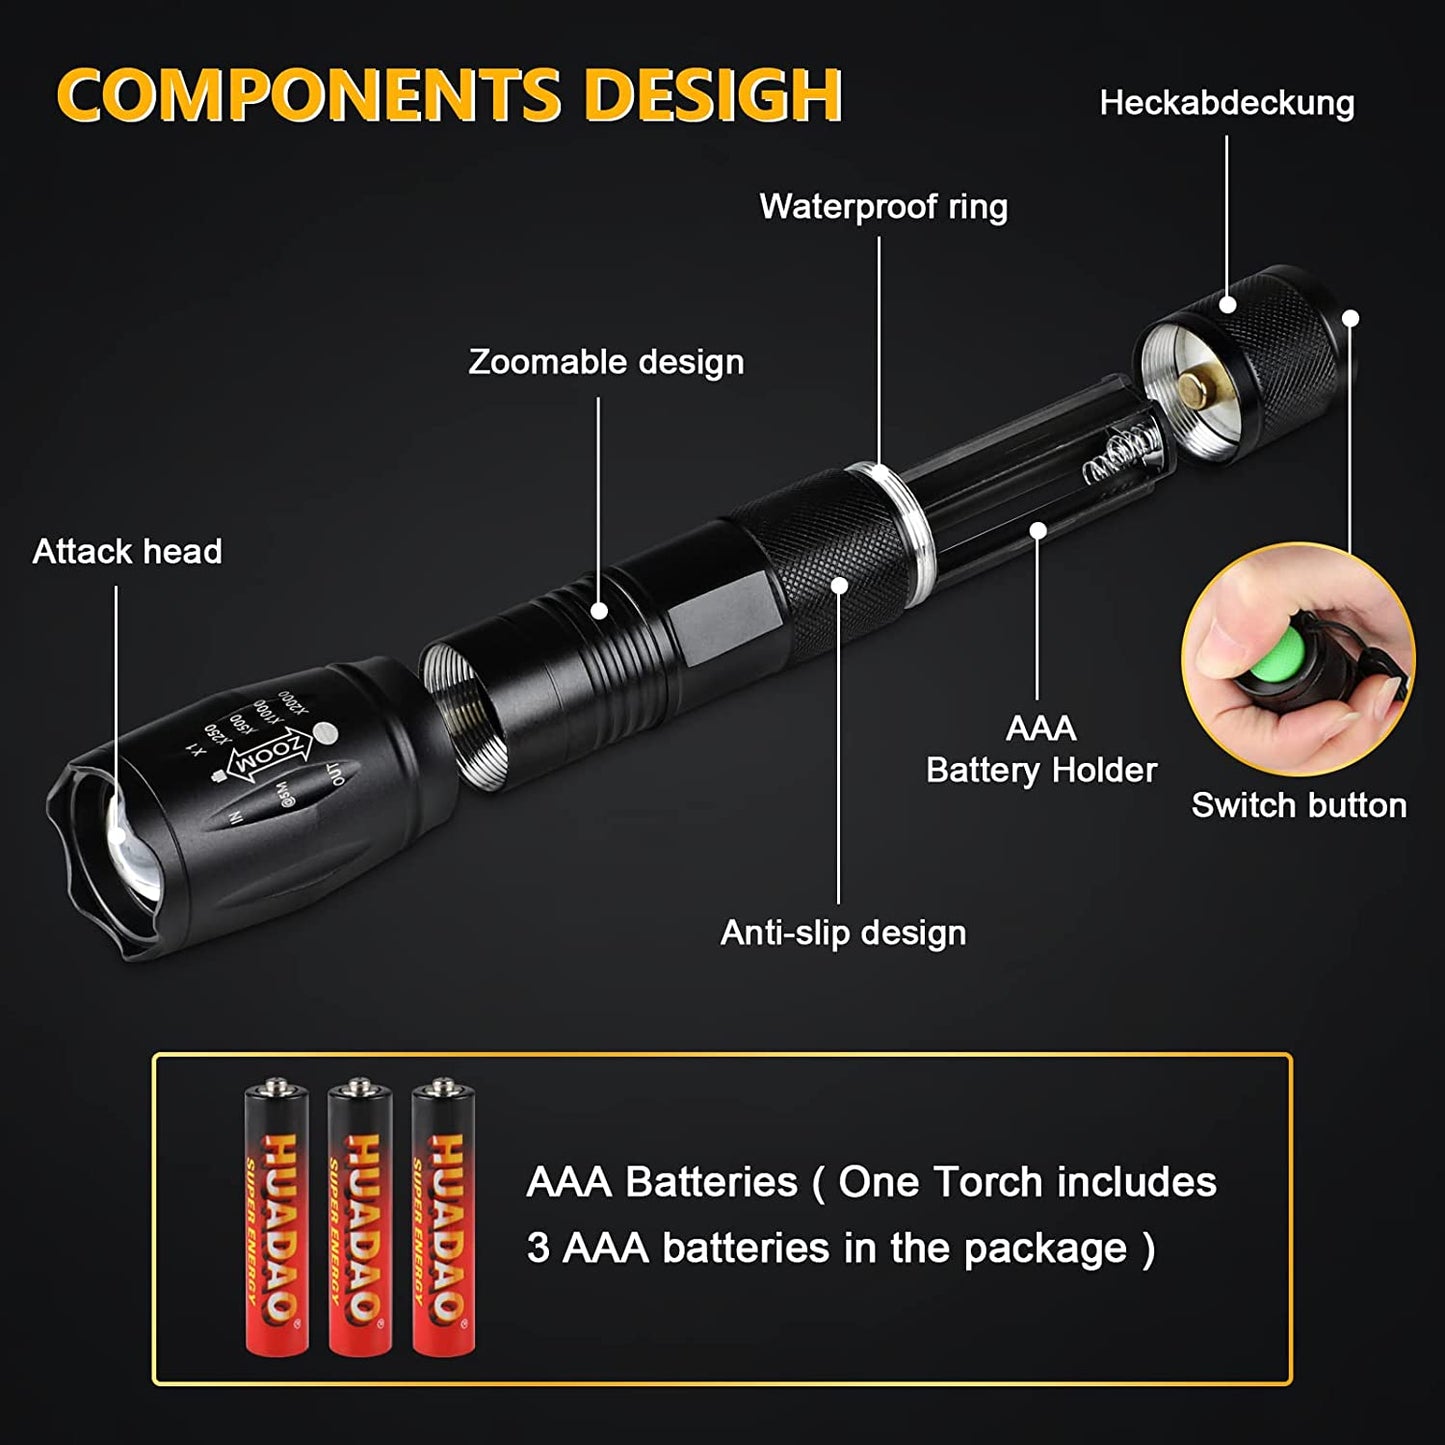 LED Torch 1 Pack, 2000LM LED Flashlight Adjustable, 5 Modes Focus , Waterproof Powerful Pocket Torch for Camping, Hiking, Walking, Outdoor, Emergency Wintory